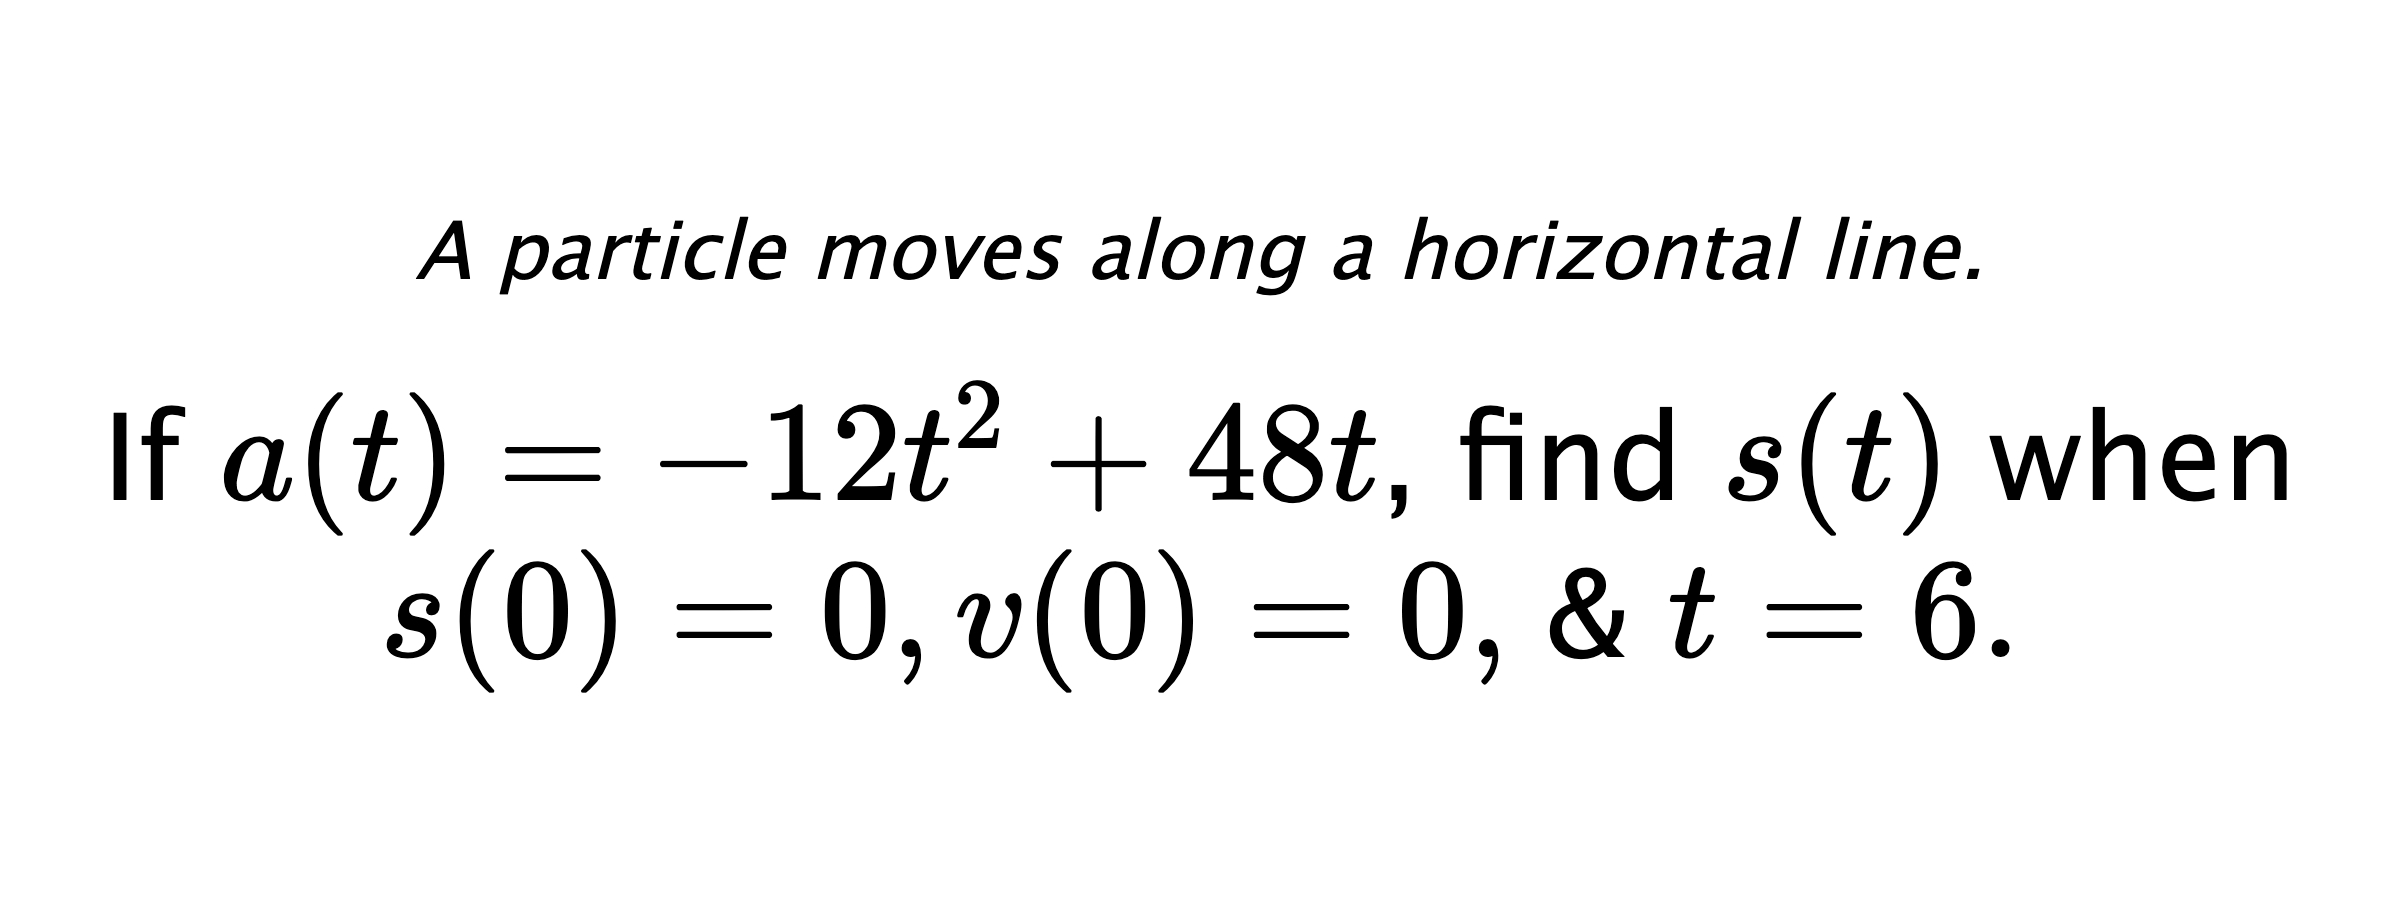 A particle moves along a horizontal line. If $ a(t)=-12t^2+48t $, find $ s(t) $ when $ s(0)=0, v(0)=0, $ & $ t=6 .$